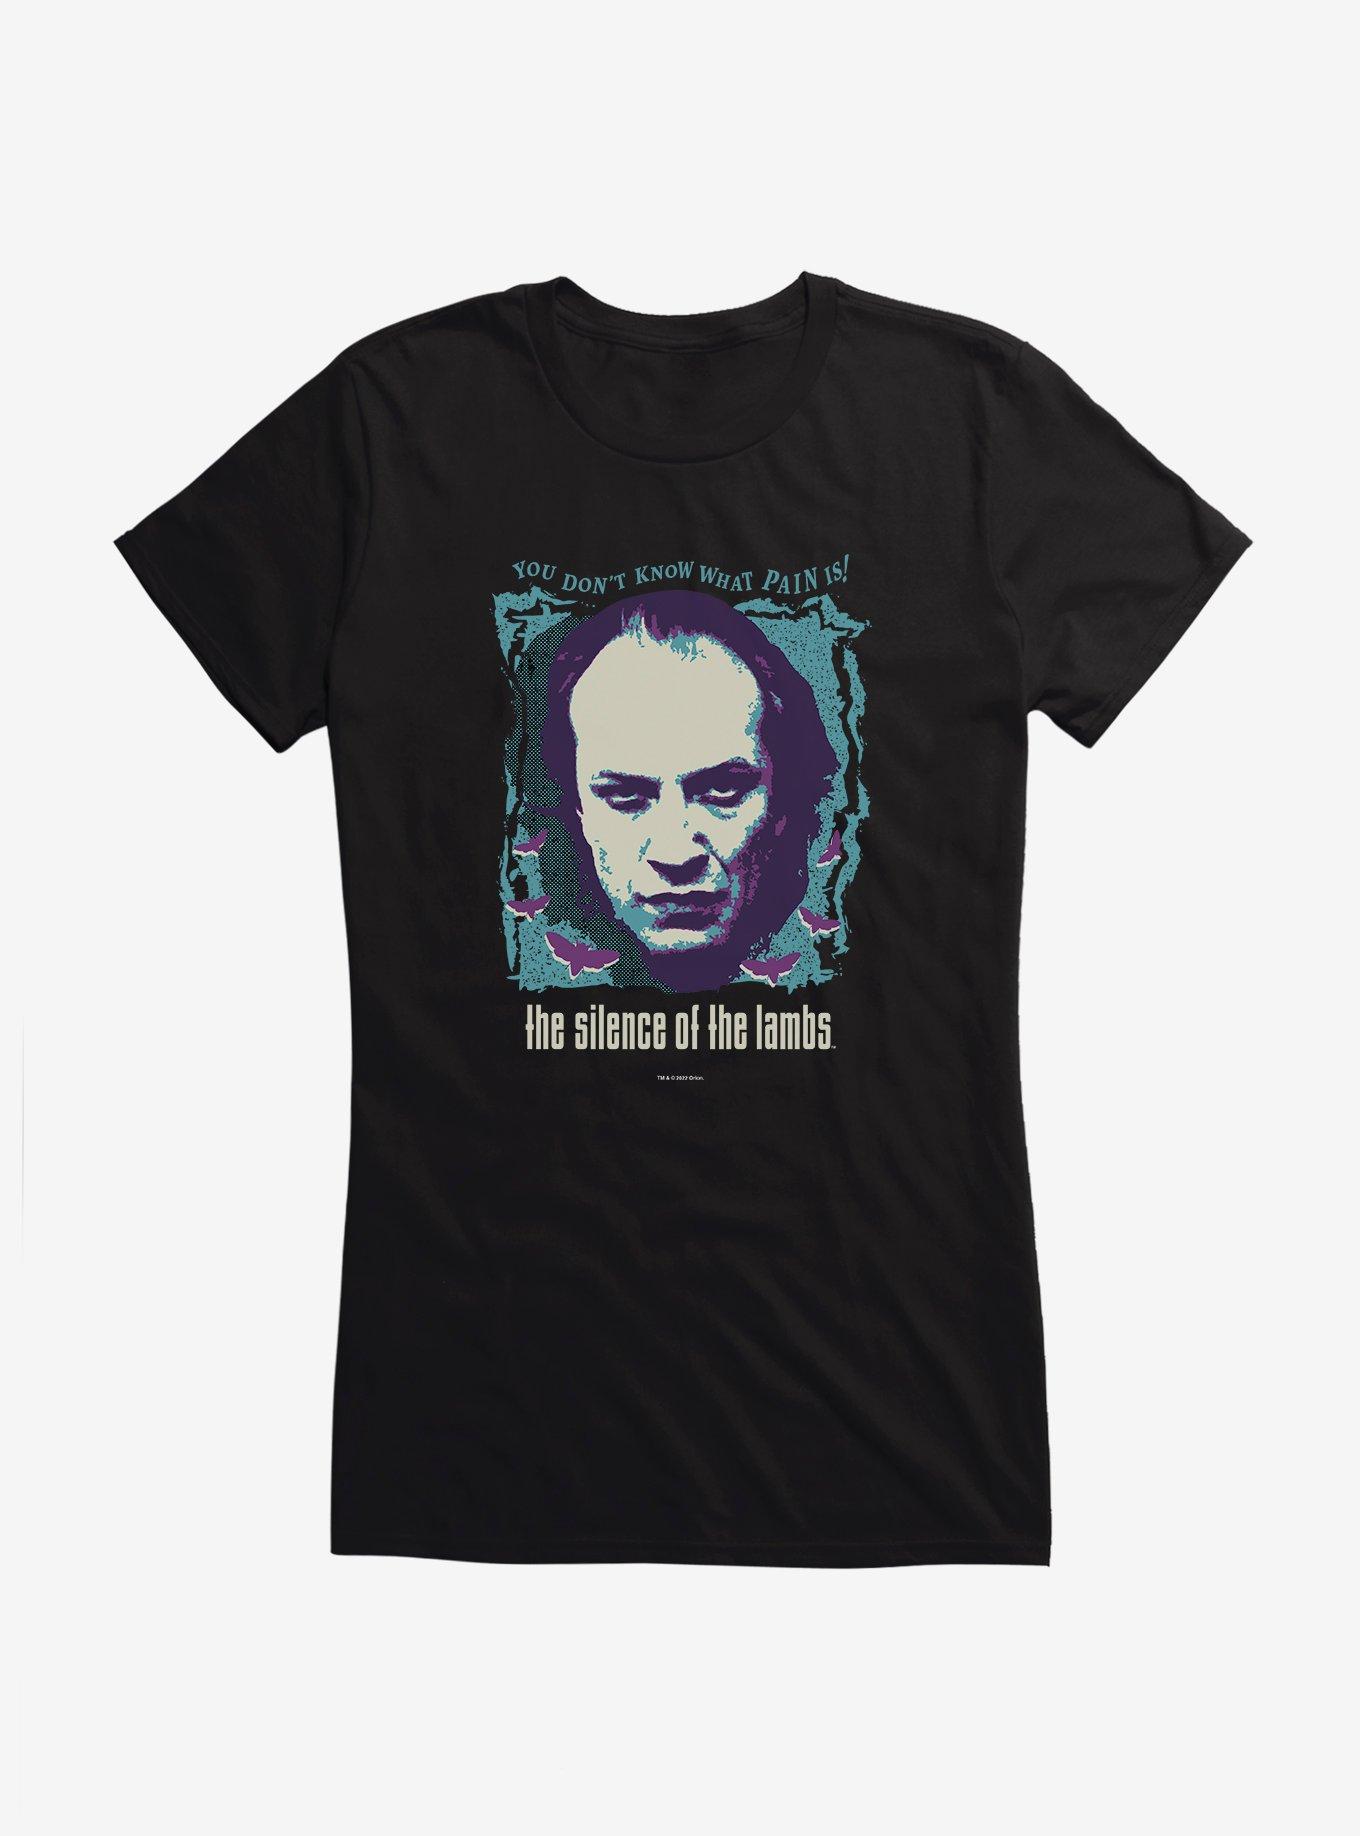 The Silence Of Lambs What Pain Is! Girls T-Shirt